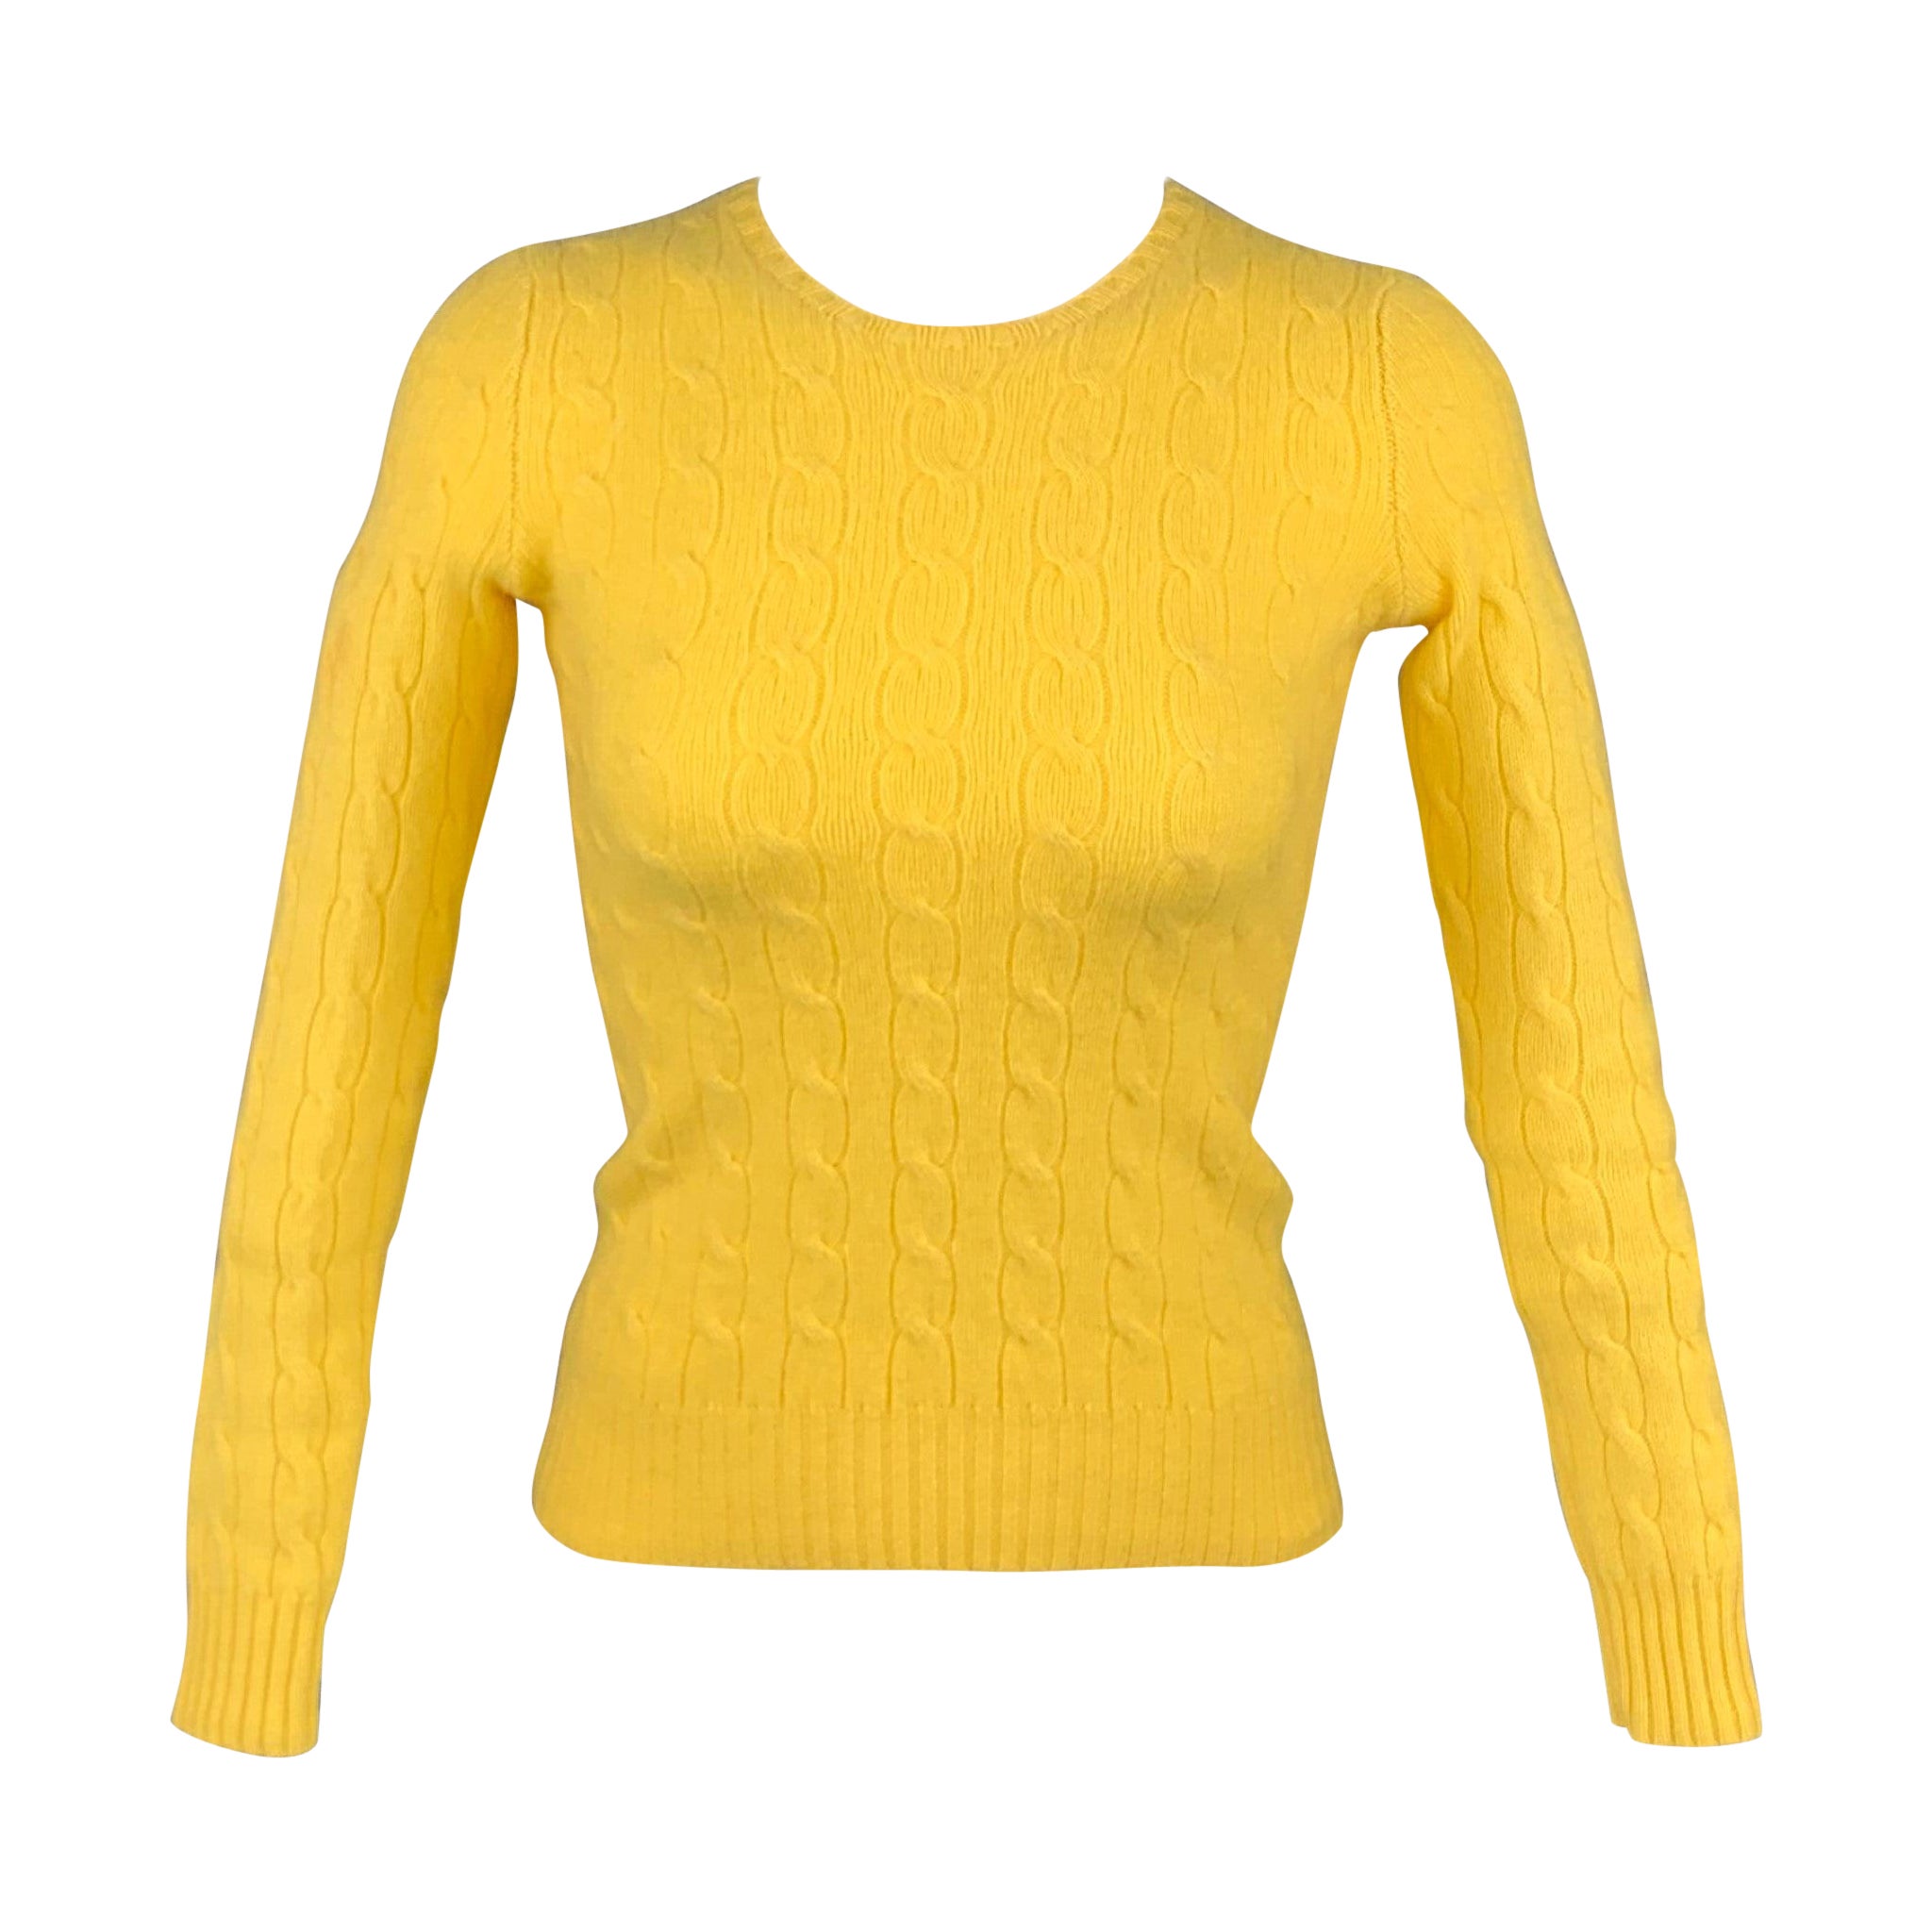 RALPH LAUREN Black Label Size S Yellow Cashmere Cable Knit Sweater For Sale